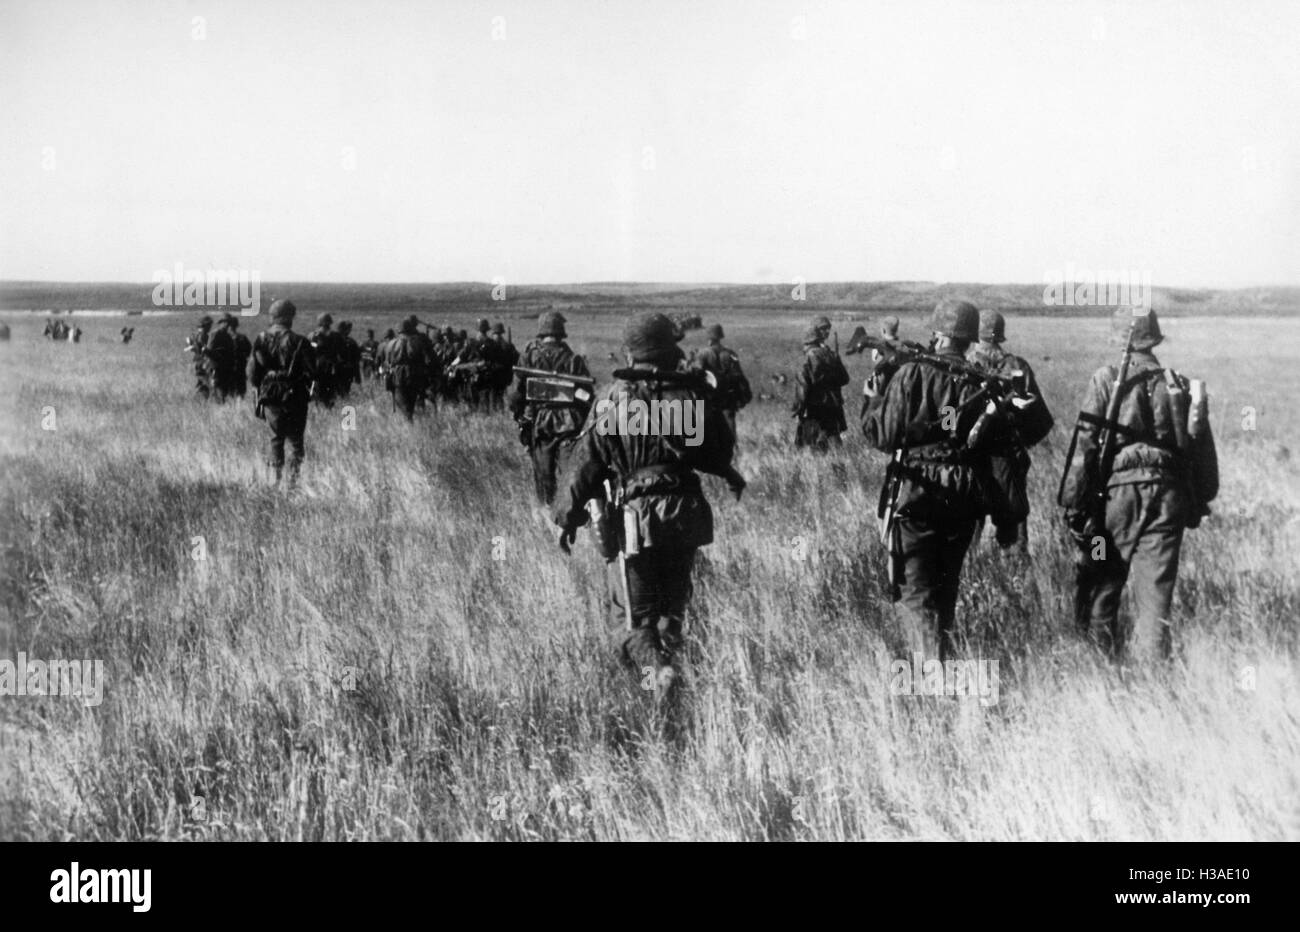 Infantry of the Waffen SS on the Eastern Front, 1941 Stock Photo